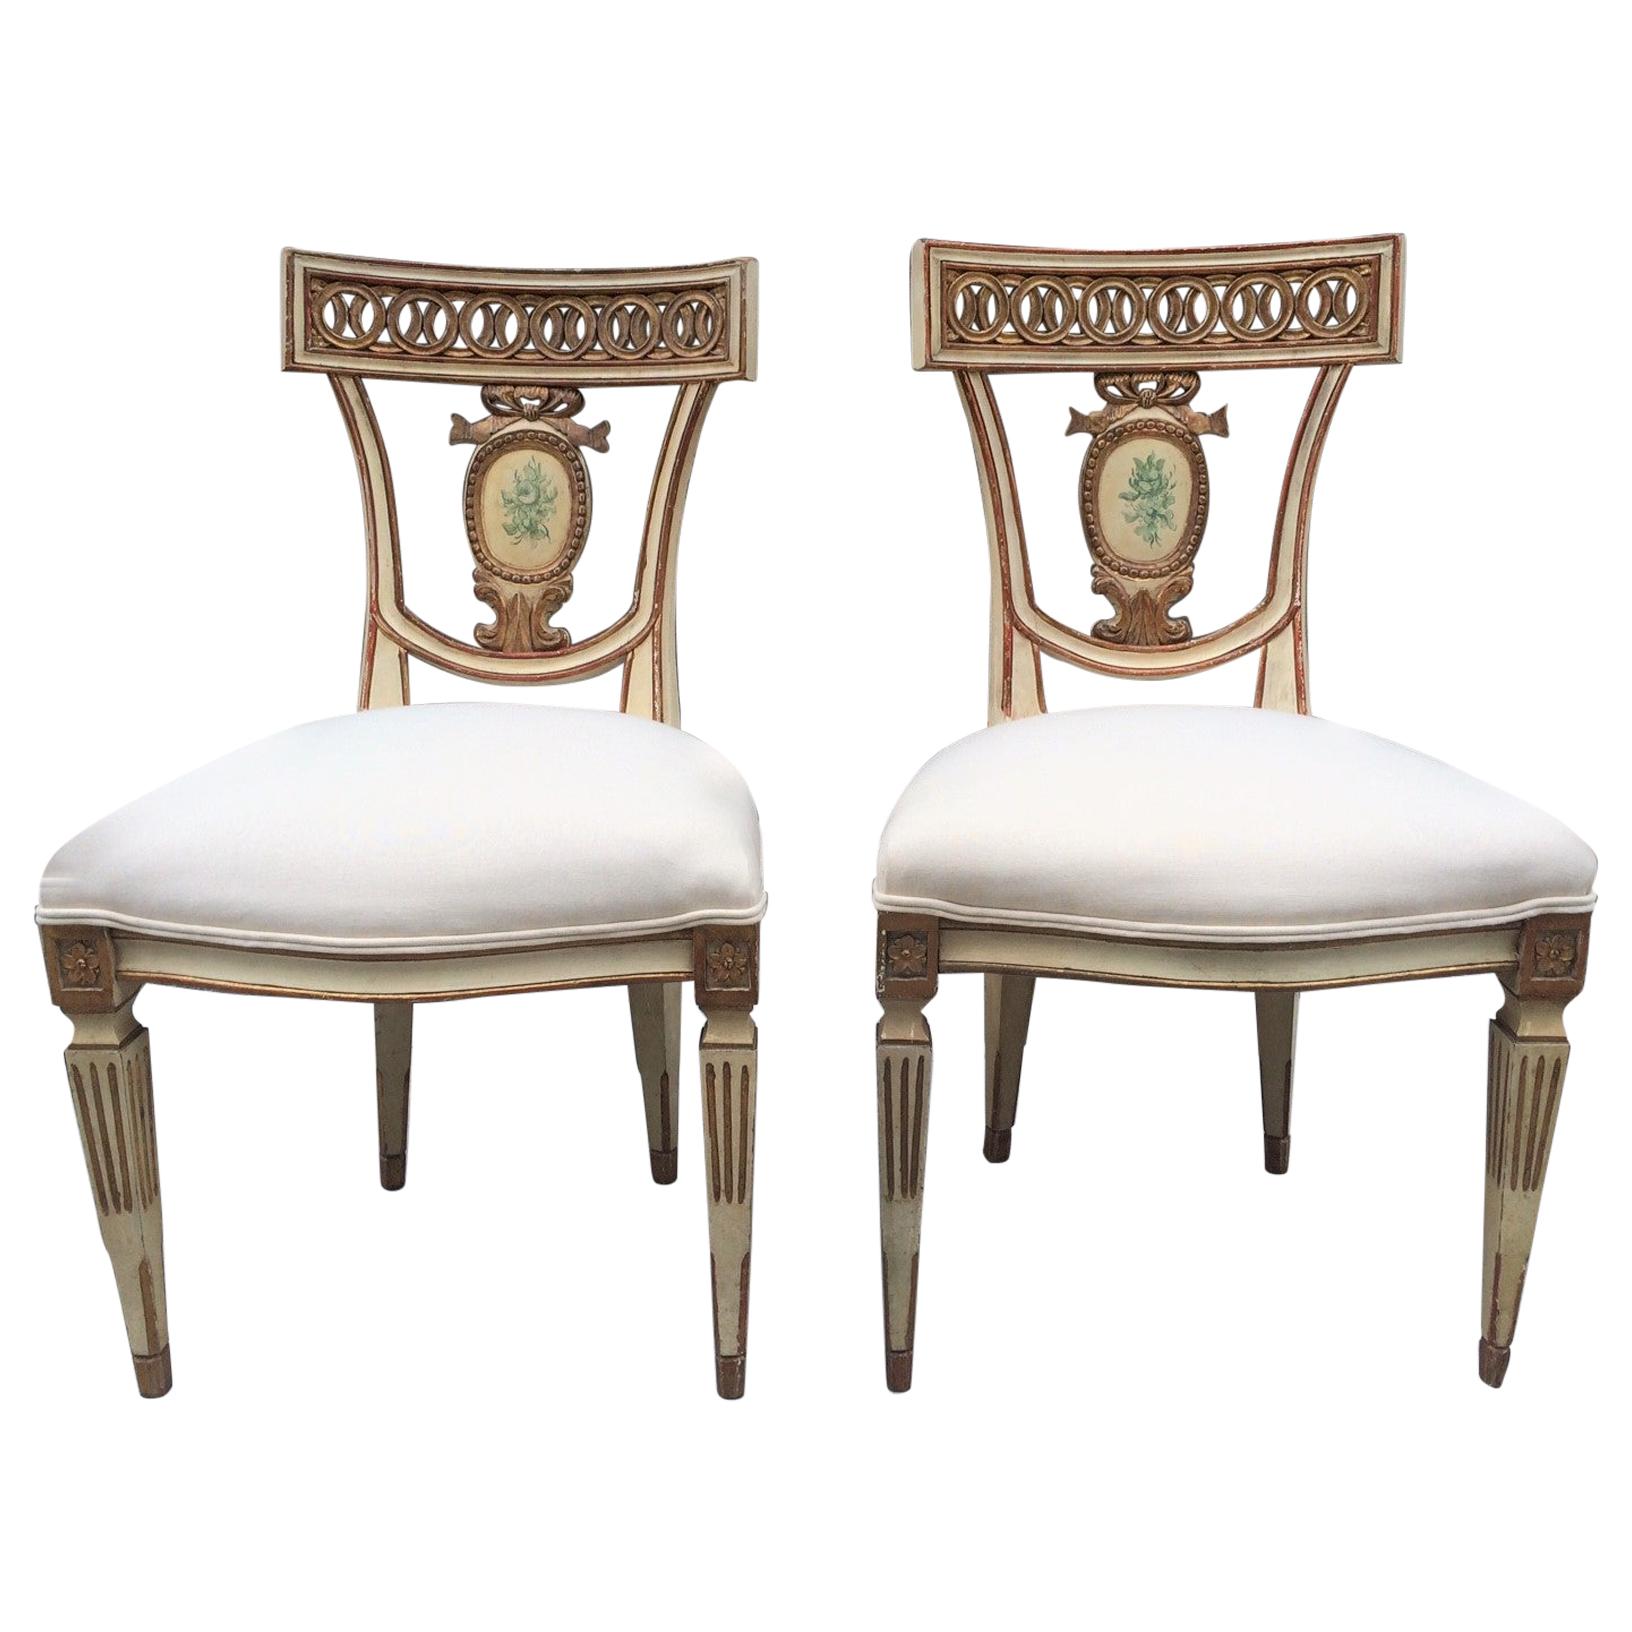 Pair of 19th Century Italian Neoclassical Side Chairs